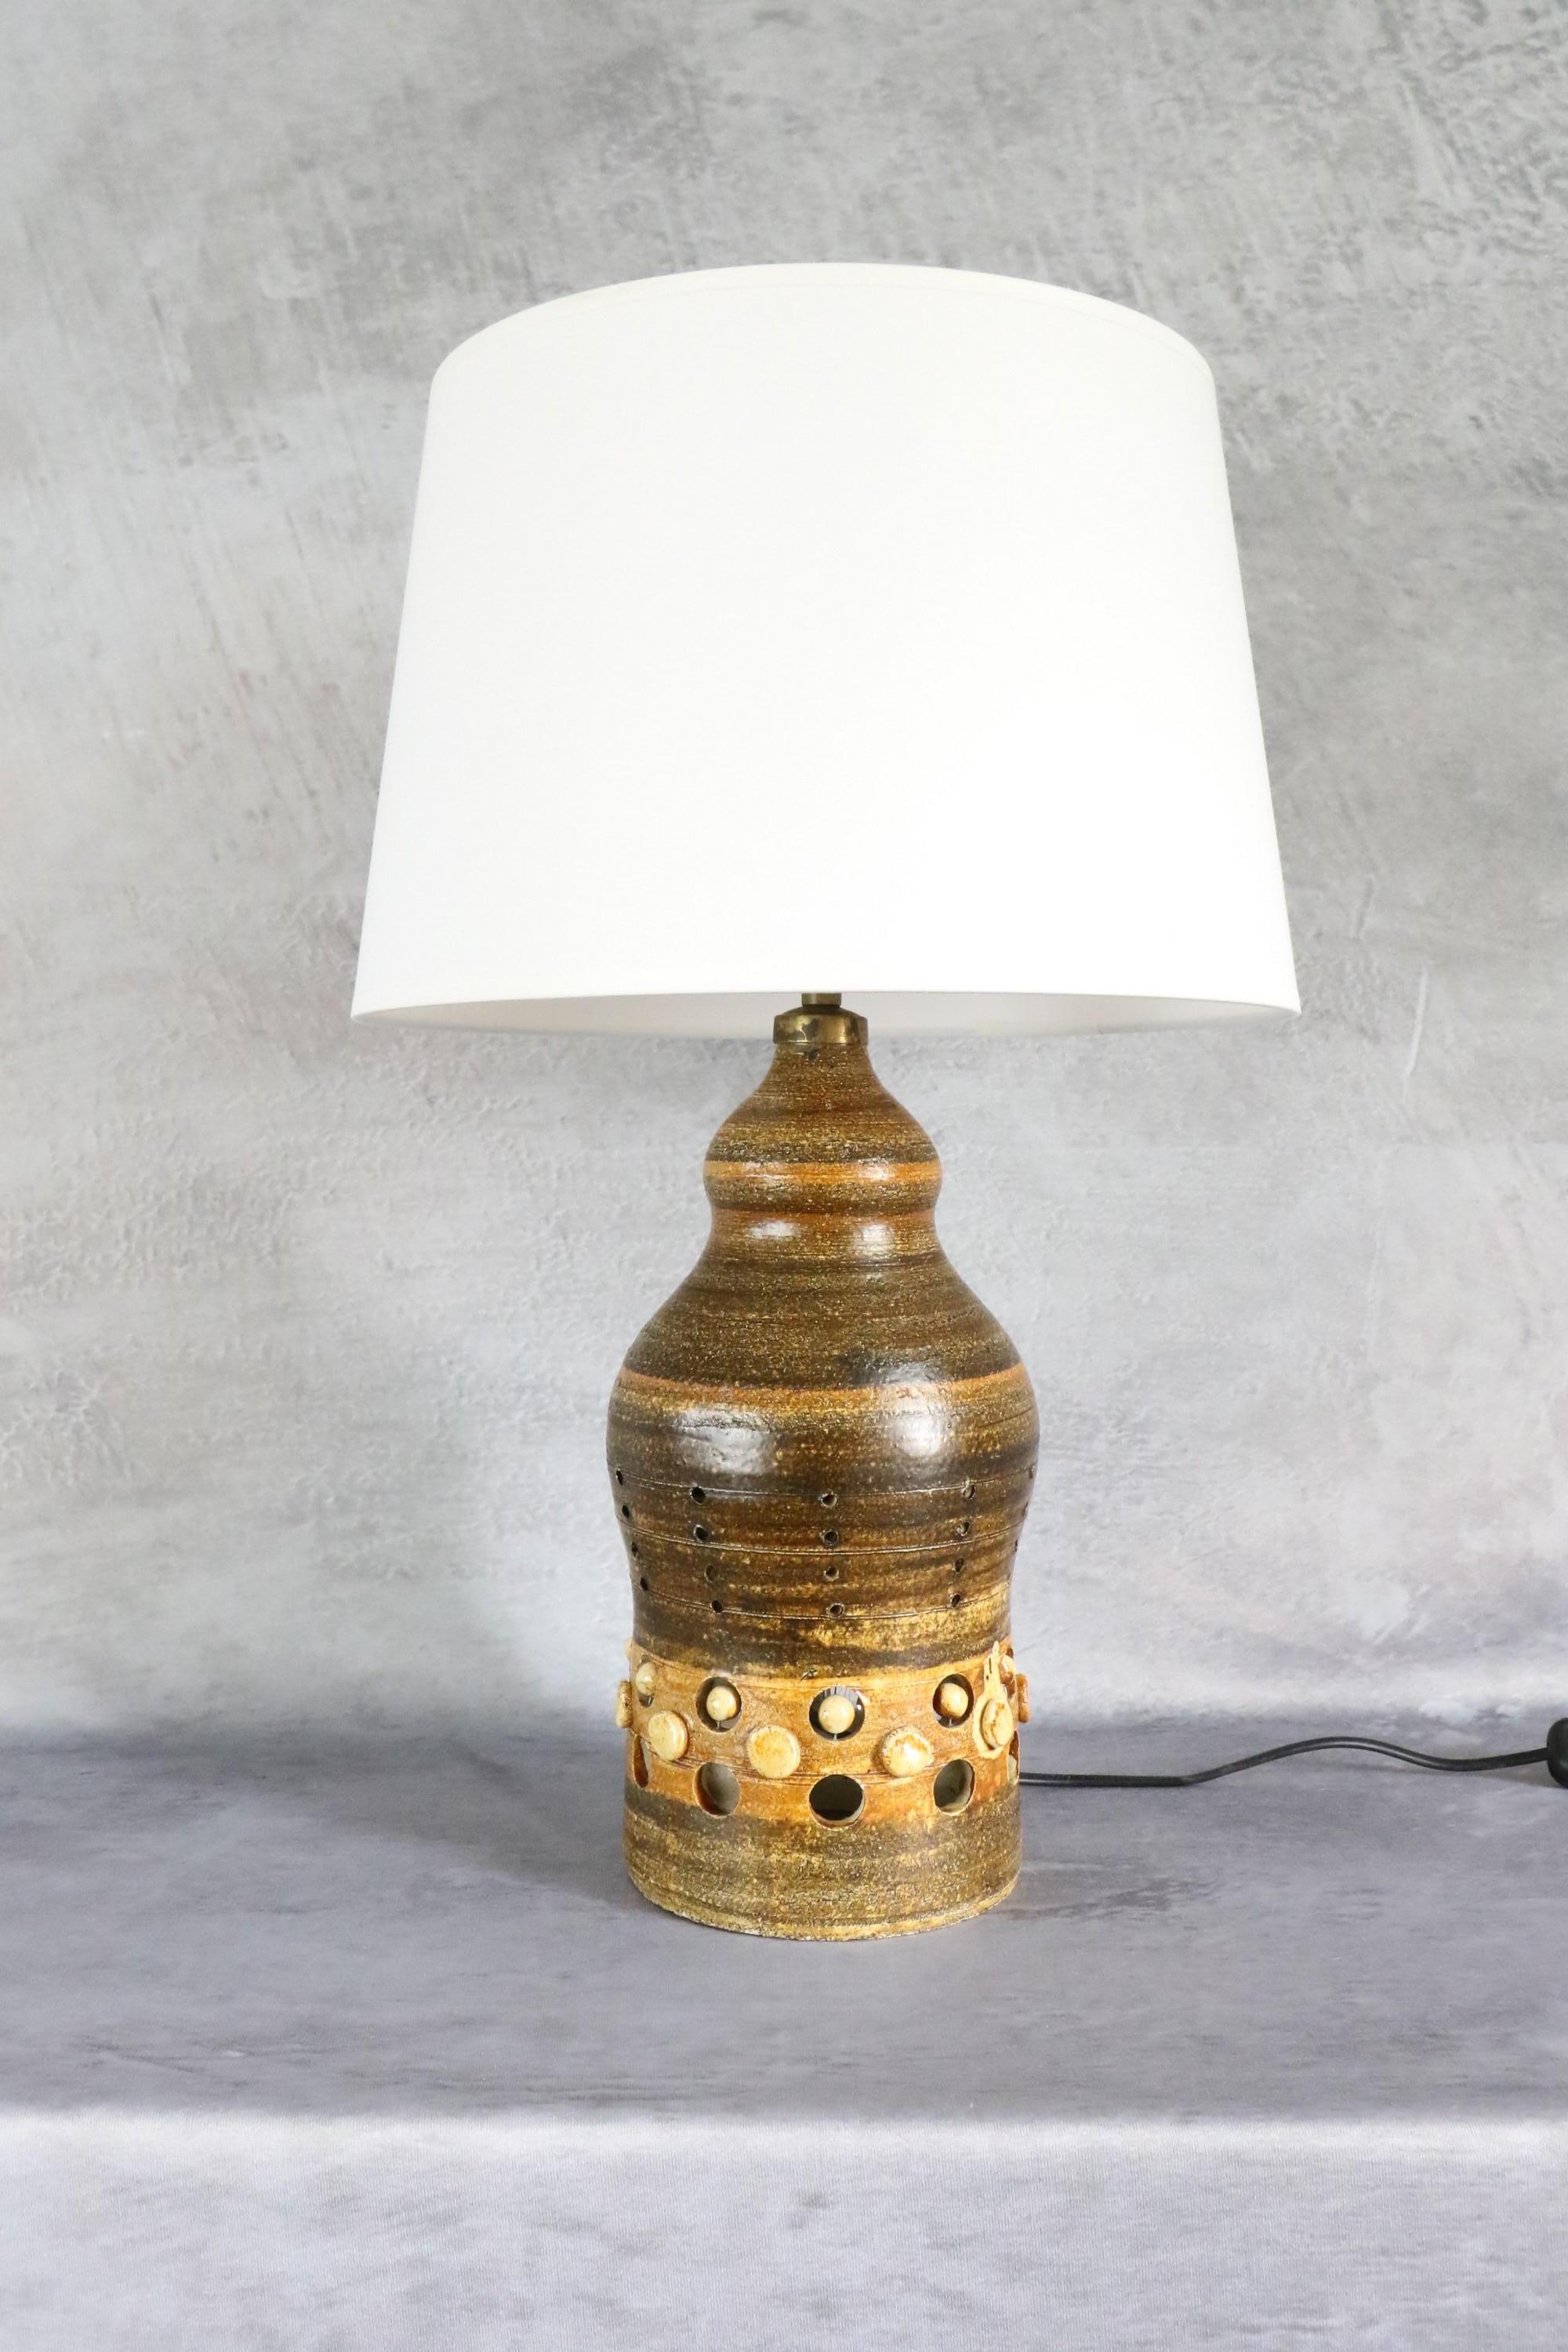 Double Lighting French Ceramic Lamp by Georges Pelletier, 1970s For Sale 1